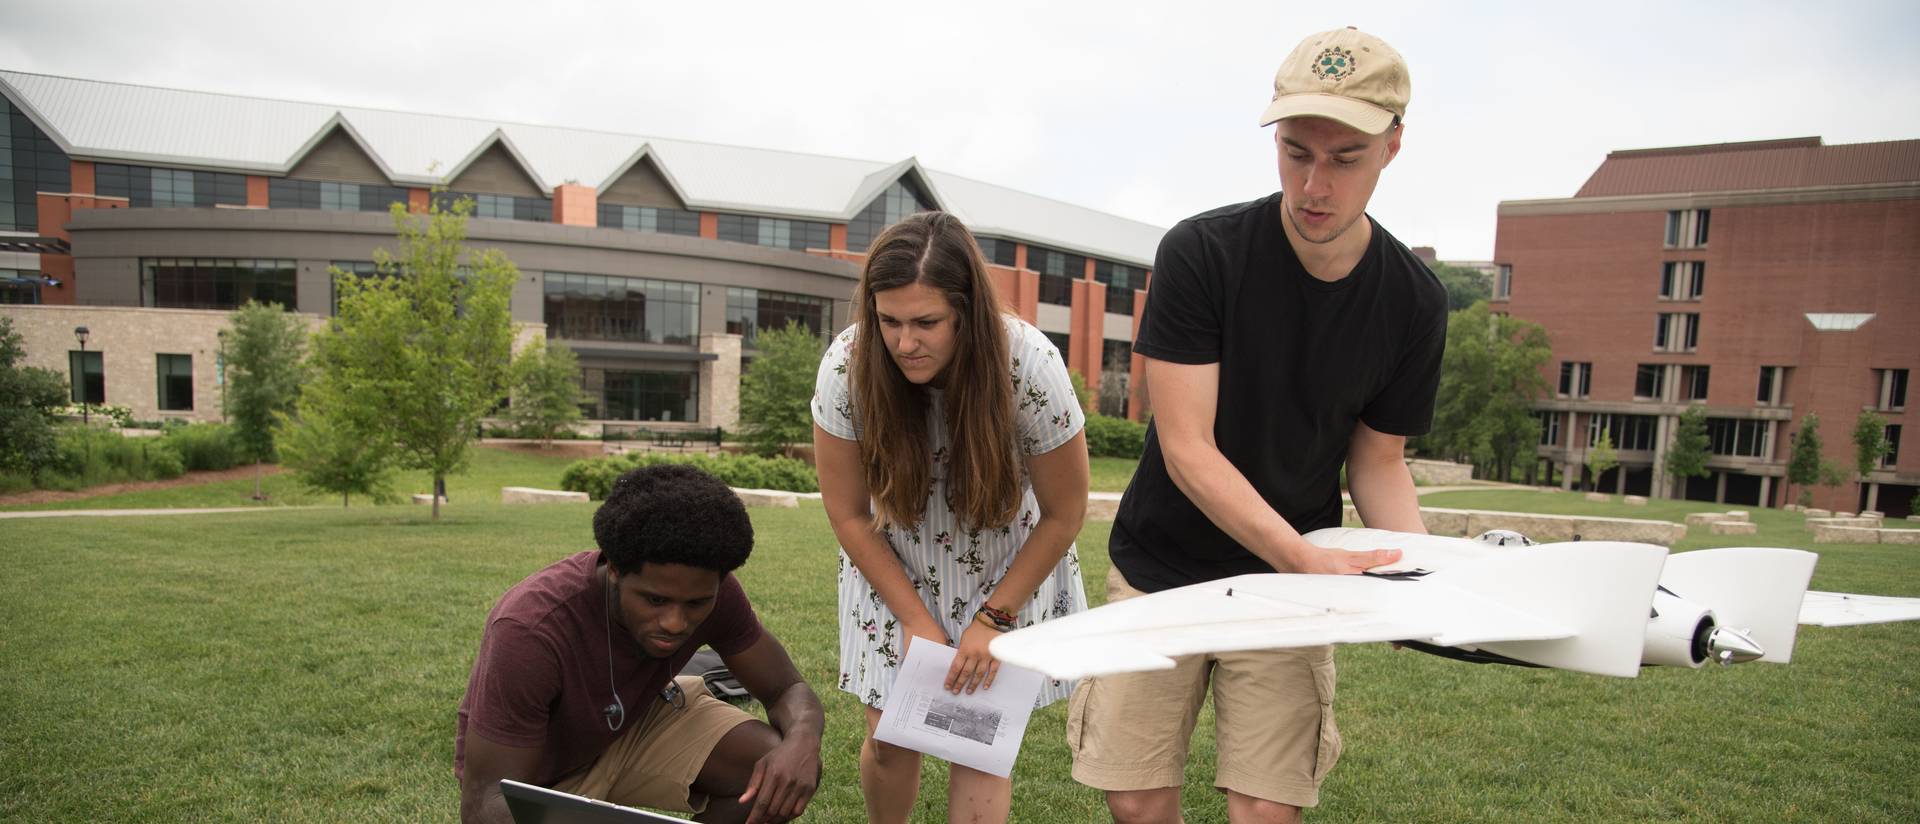 Three students work with a drone on the campus mall.